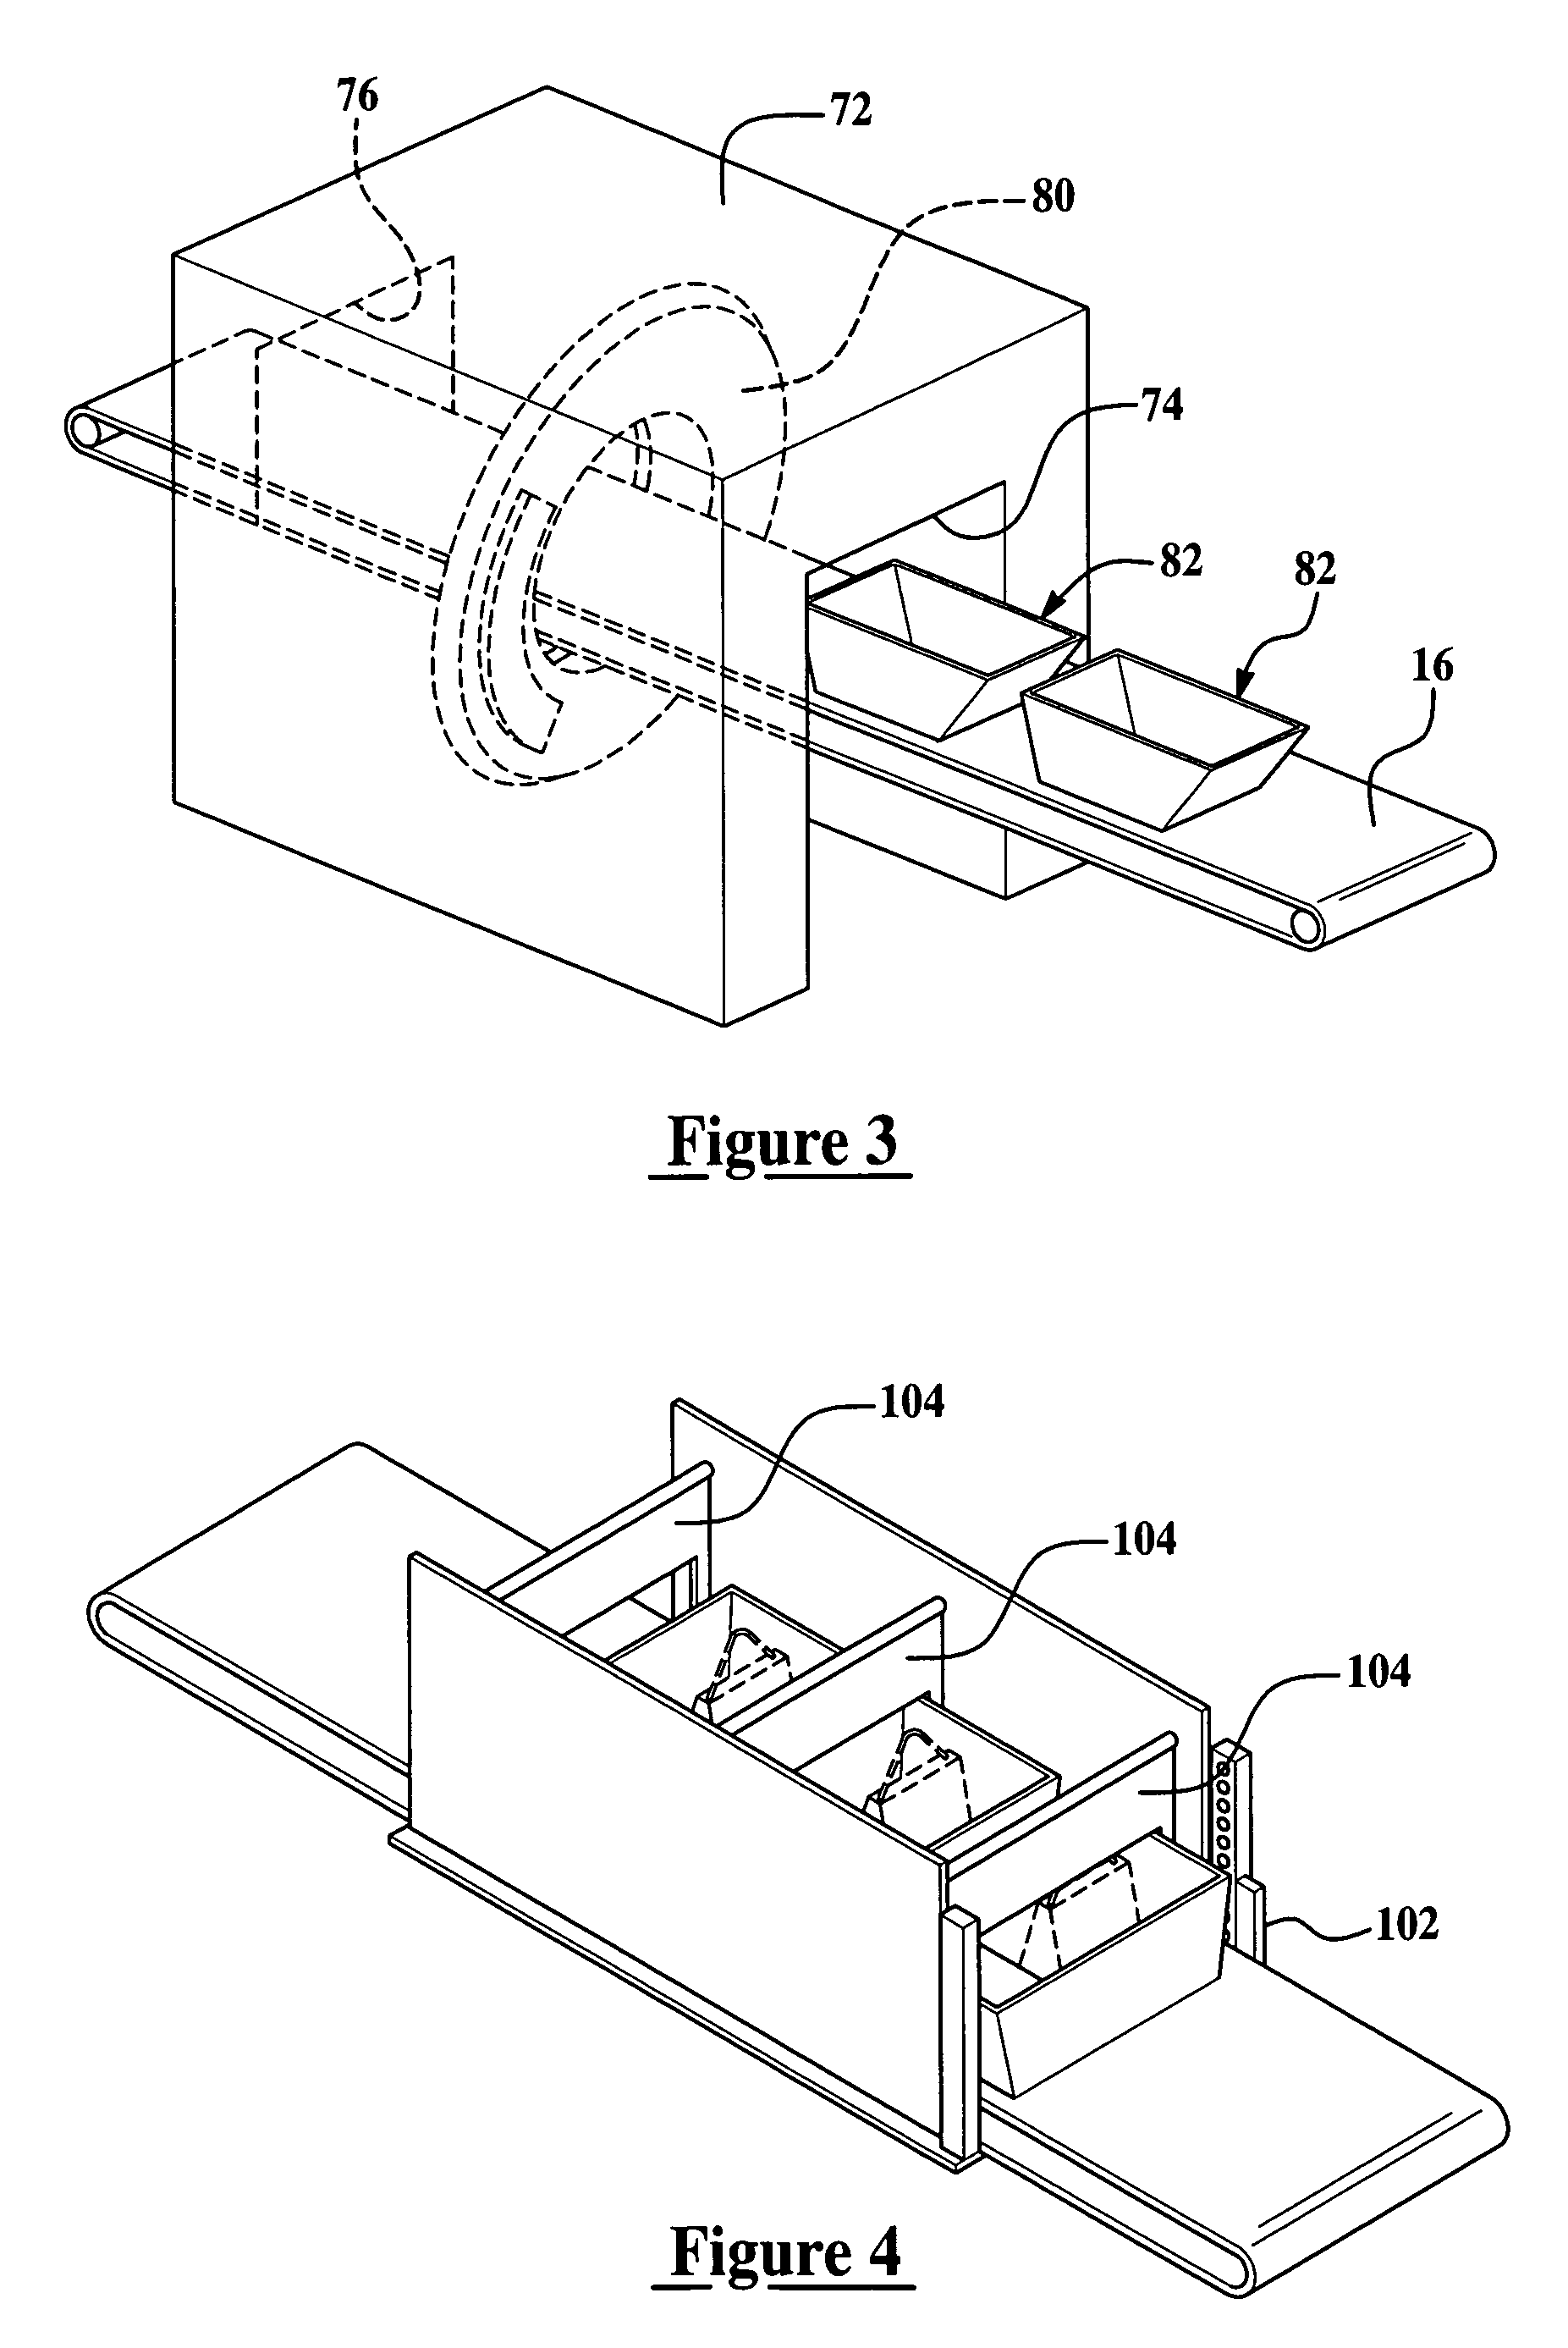 Apparatus and method for providing a shielding means for an X-ray detection system